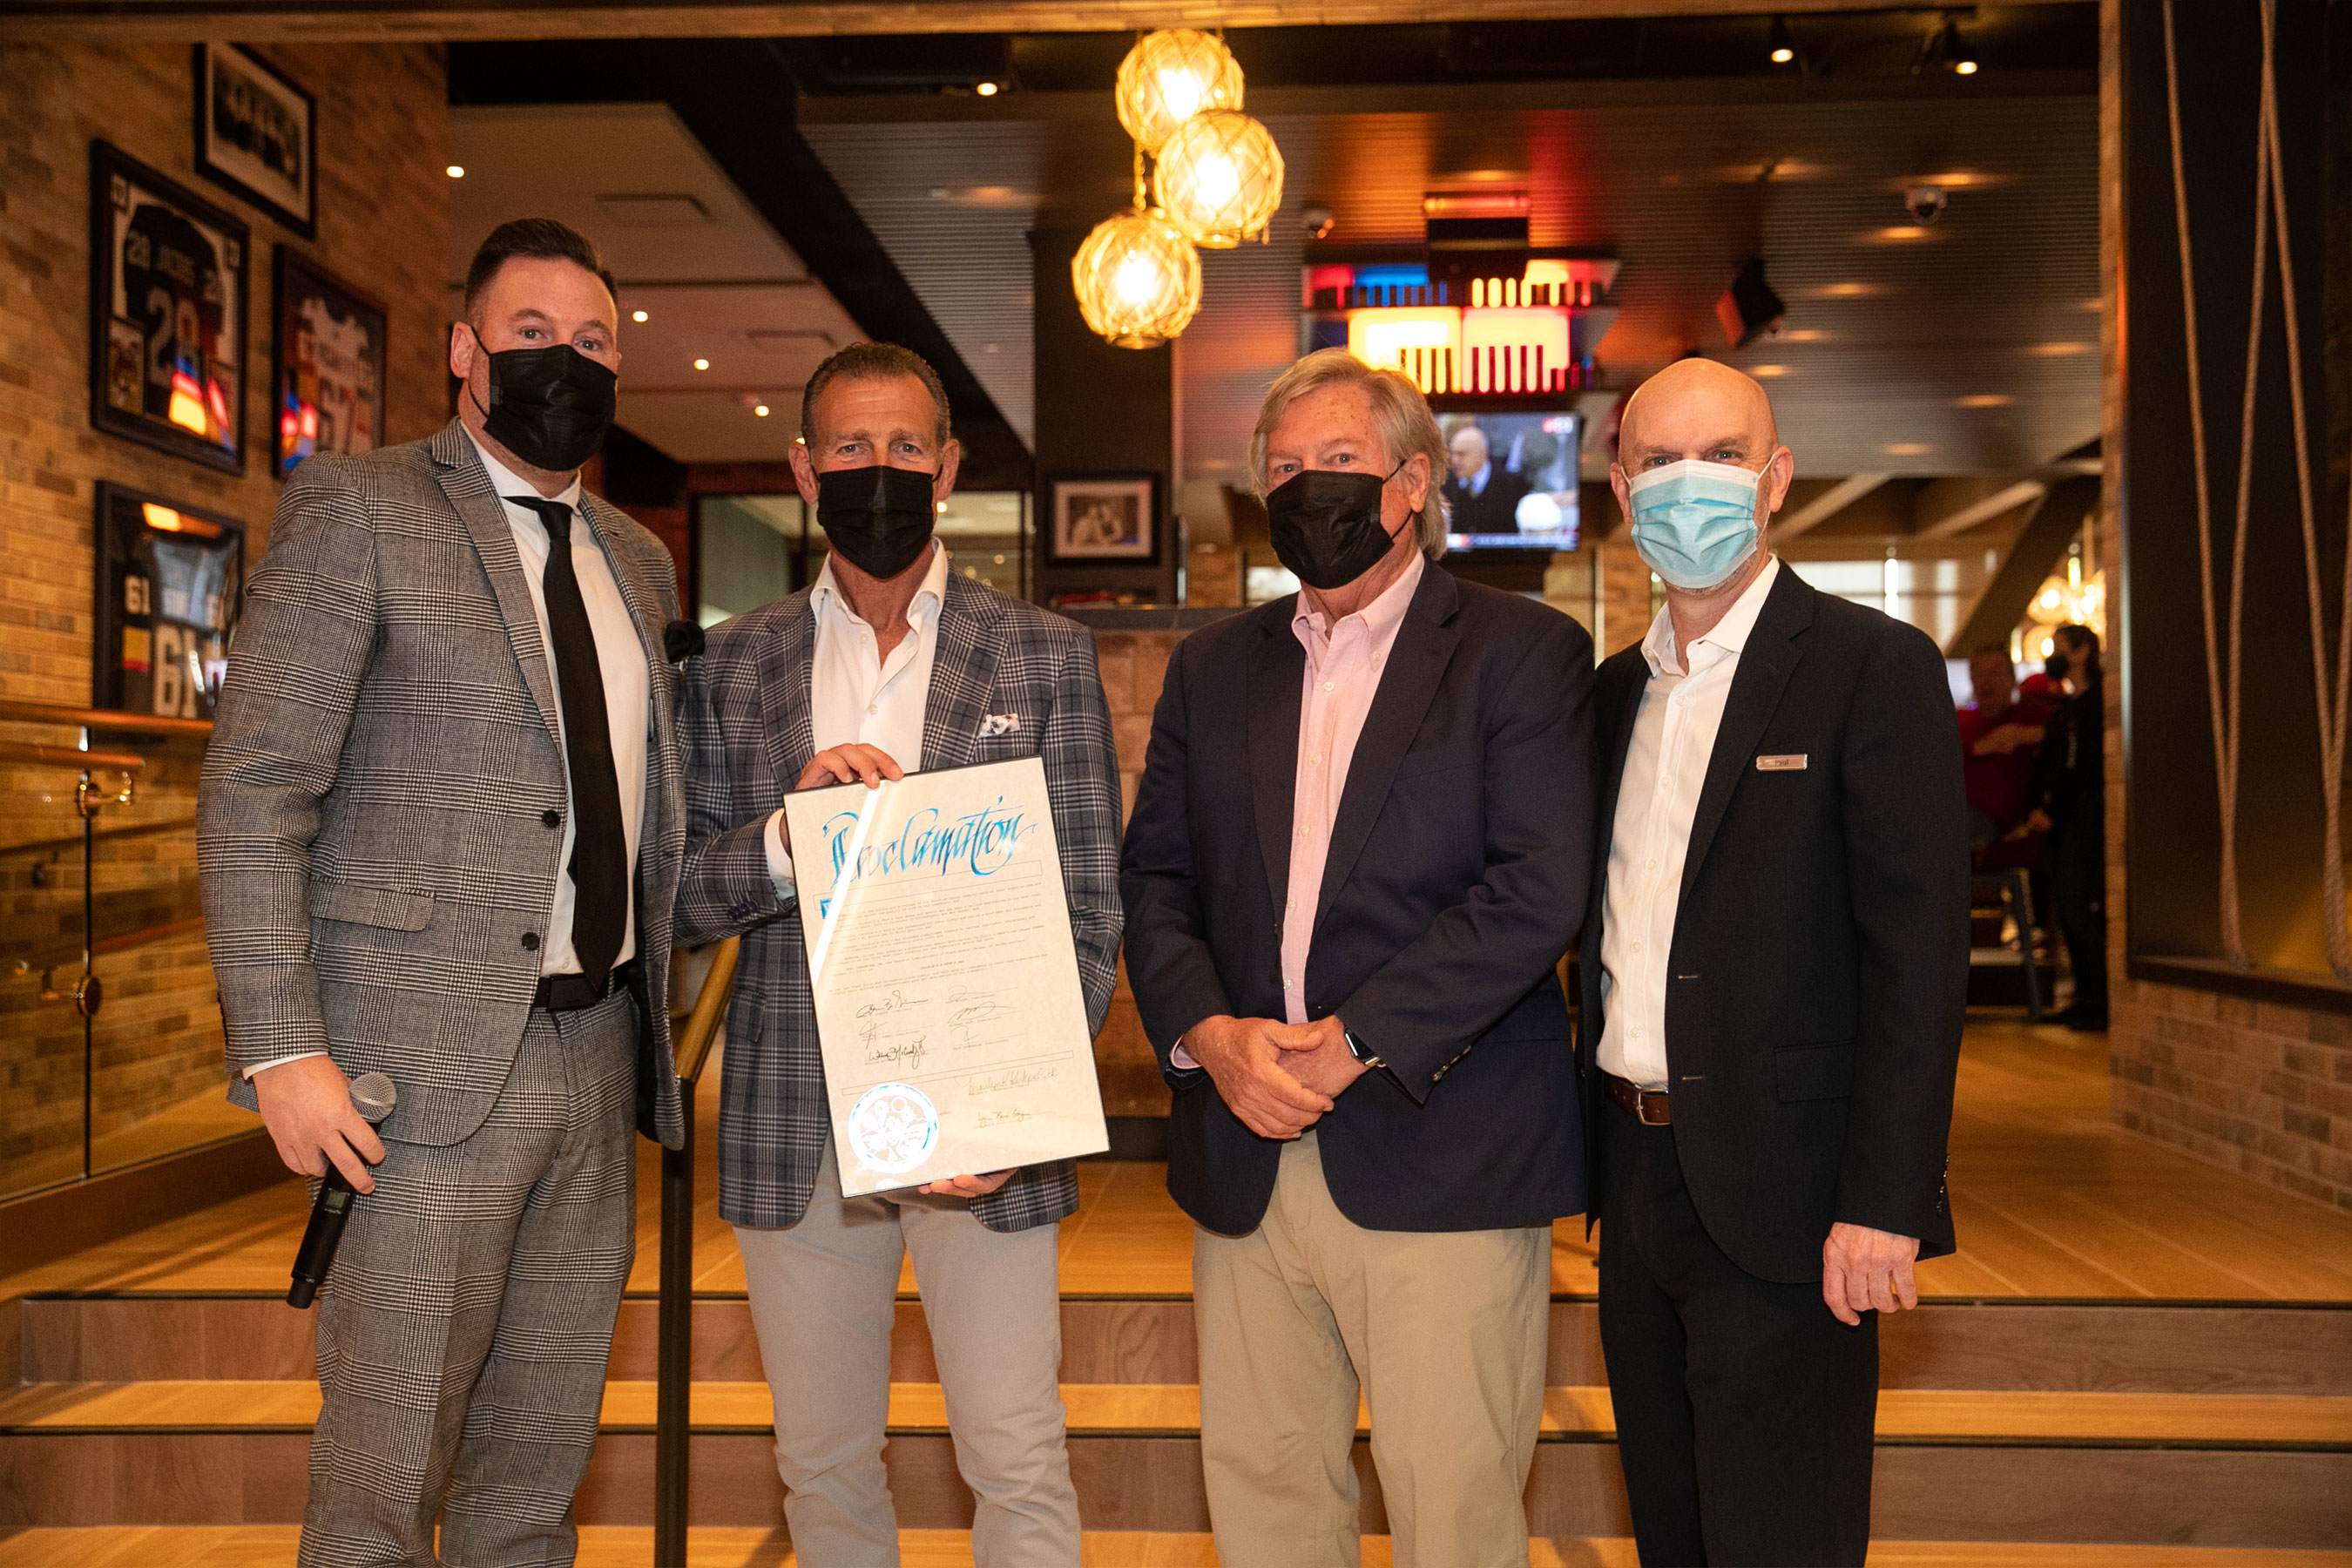 October 21, 2021 is officially proclaimed Chickie’s & Pete’s Day on the Las Vegas Strip. (L-R) Anthony Olheiser, Pete Ciarrocchi, Clark County Commissioner Tick Segerblom, and Paul Hobson